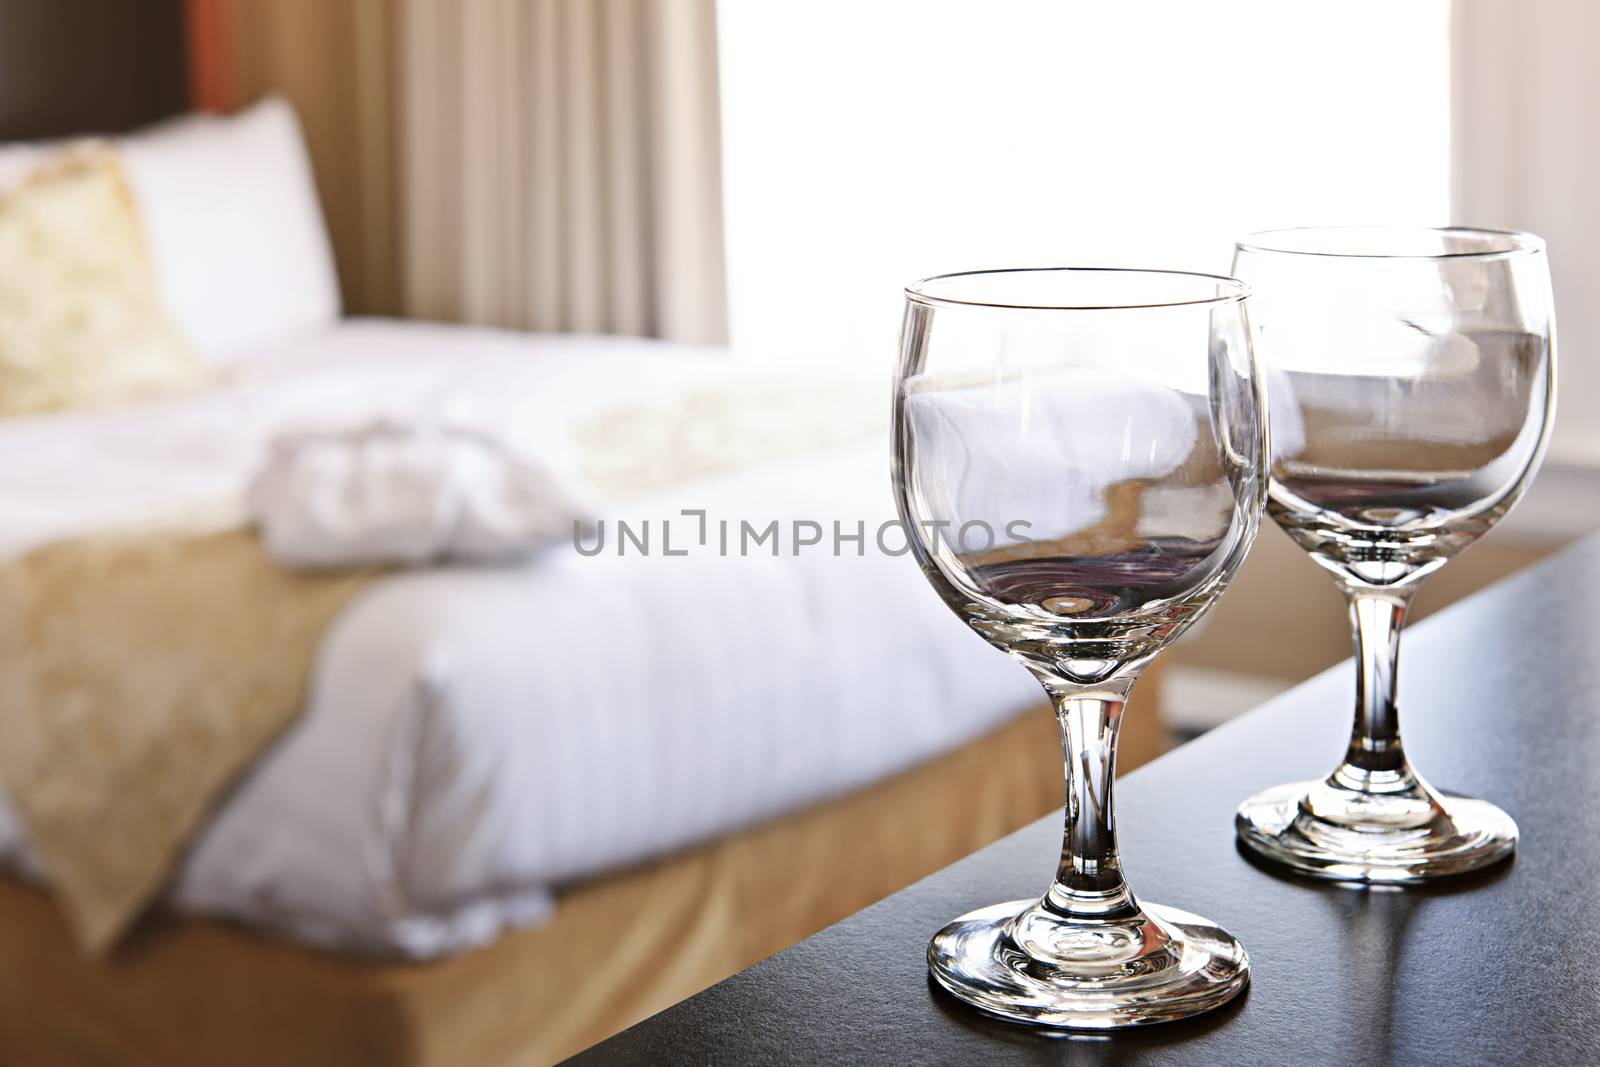 Wineglasses in hotel room by elenathewise